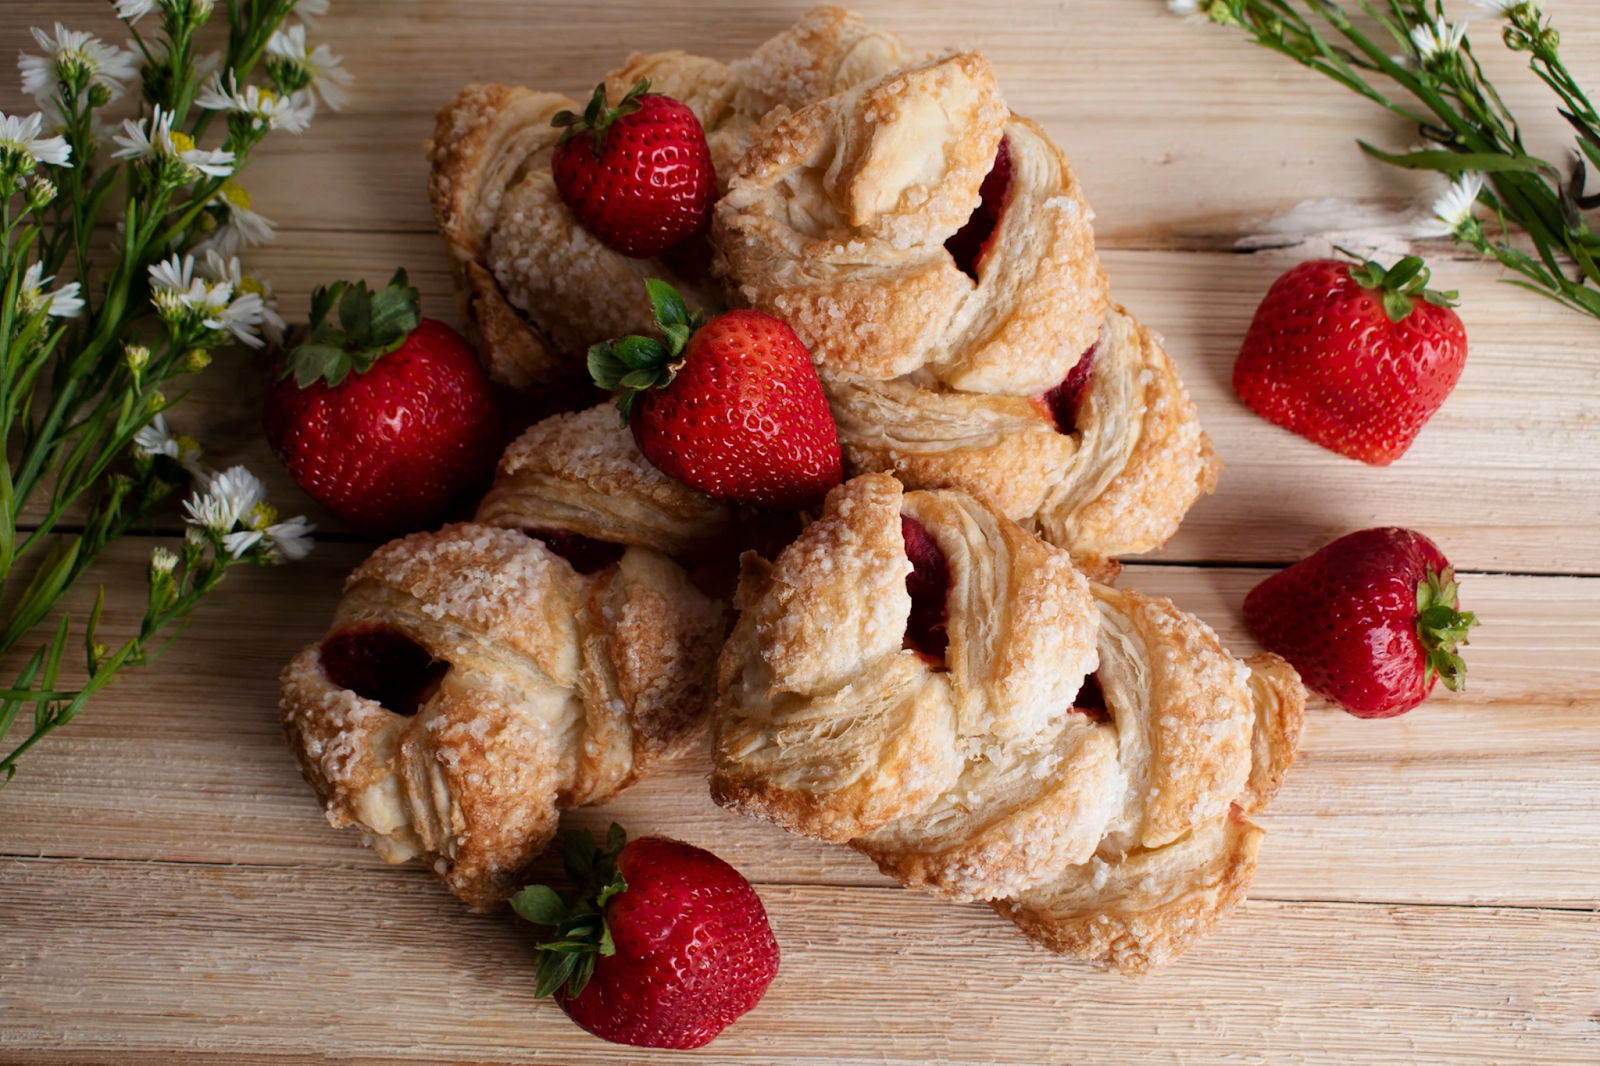 Photograph of Pastries by Mackenzie Burgess.